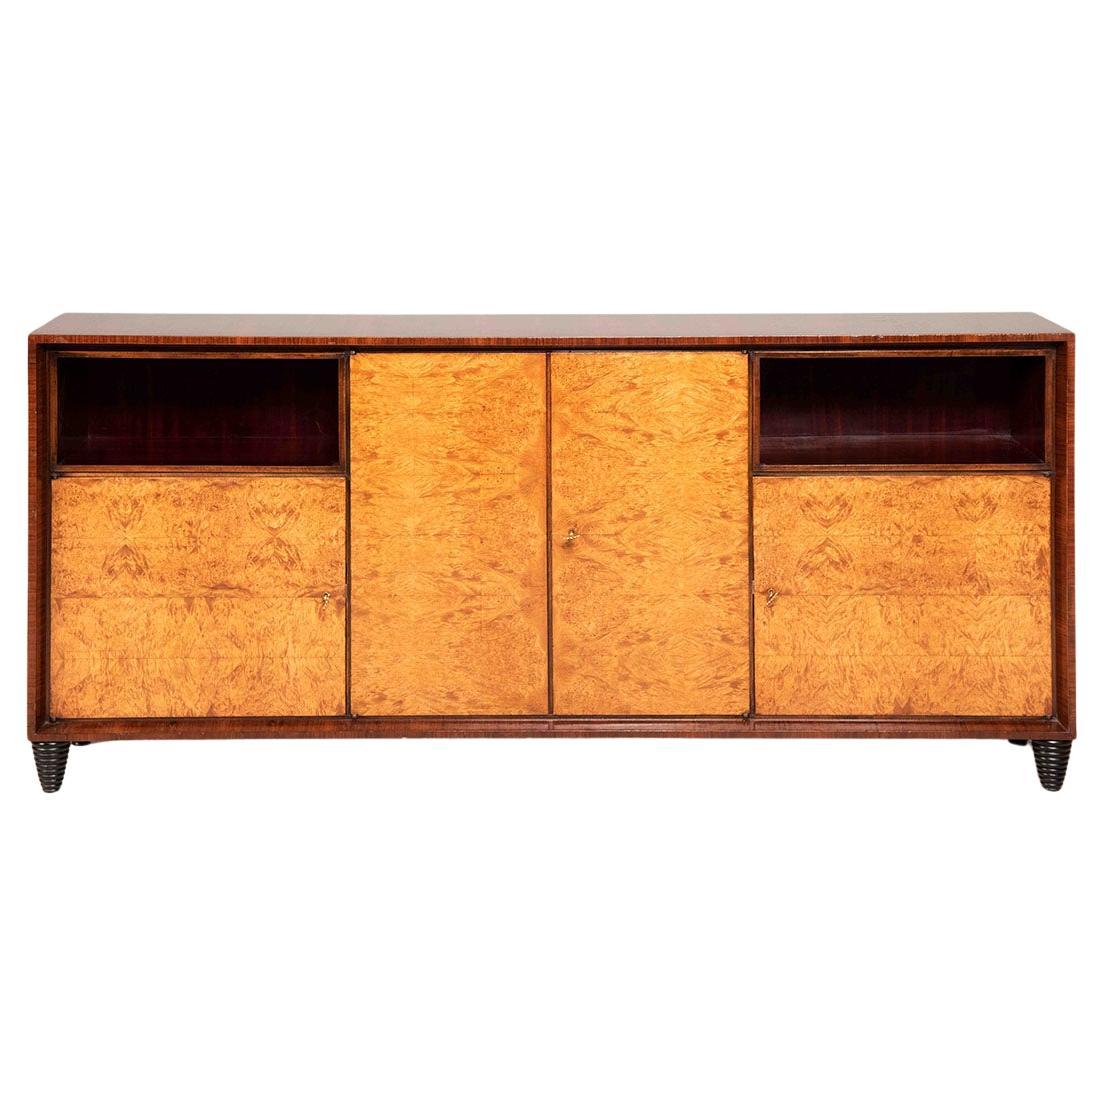 1940s Art Deco Wooden Bar Cabinet Sideboard, Mirrored and Illuminated Interior For Sale